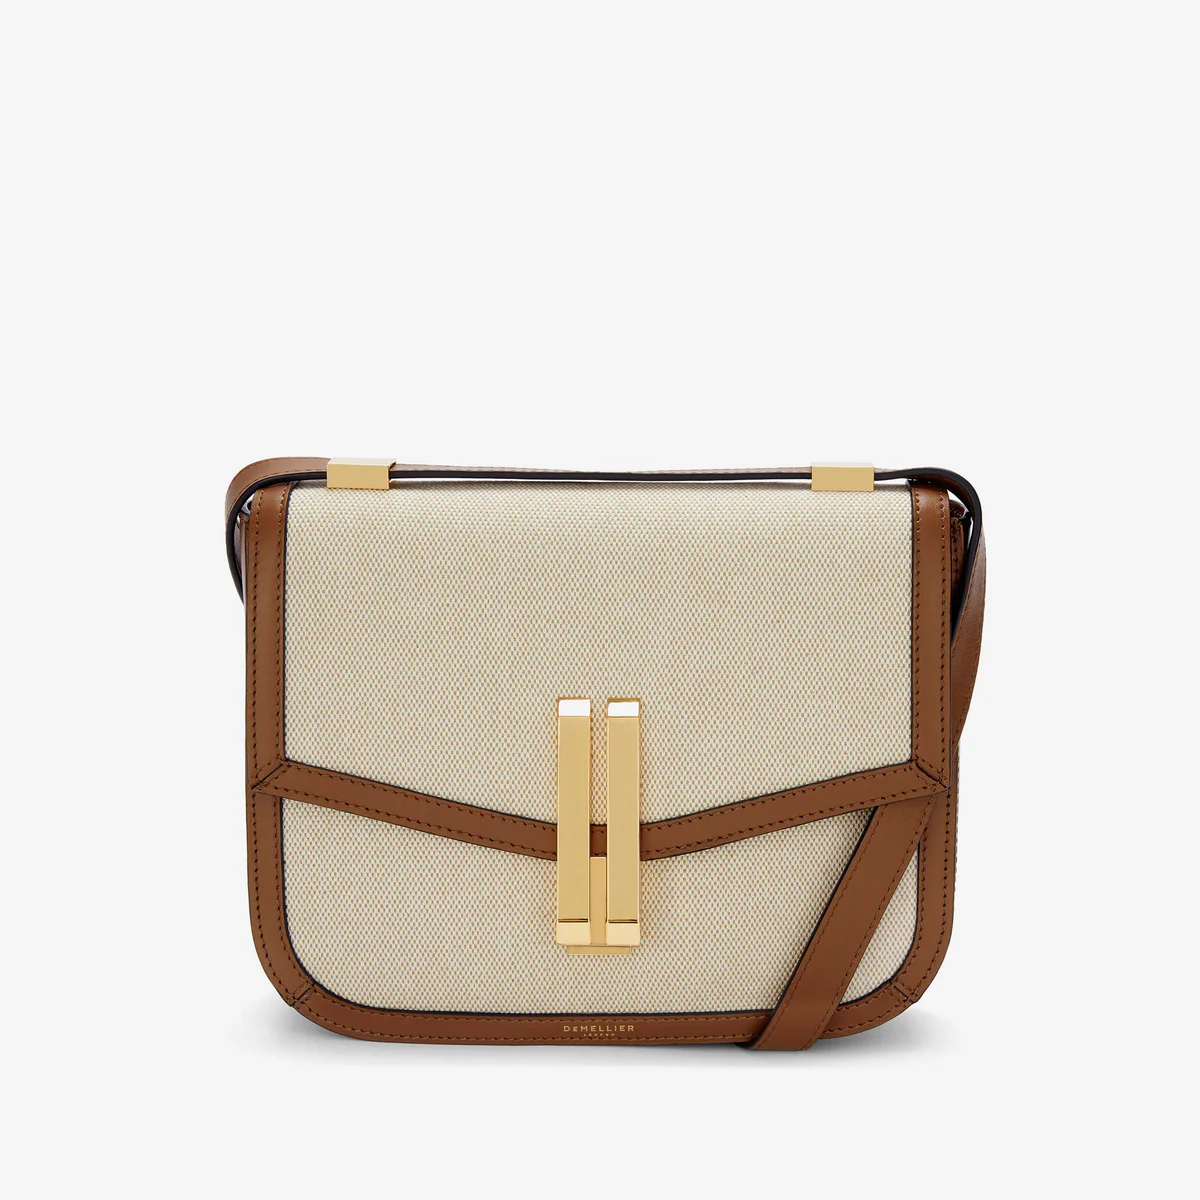 DeMellier, The Vancouver Bag in Salt & Pepper Canvas and Tan Smooth Leather